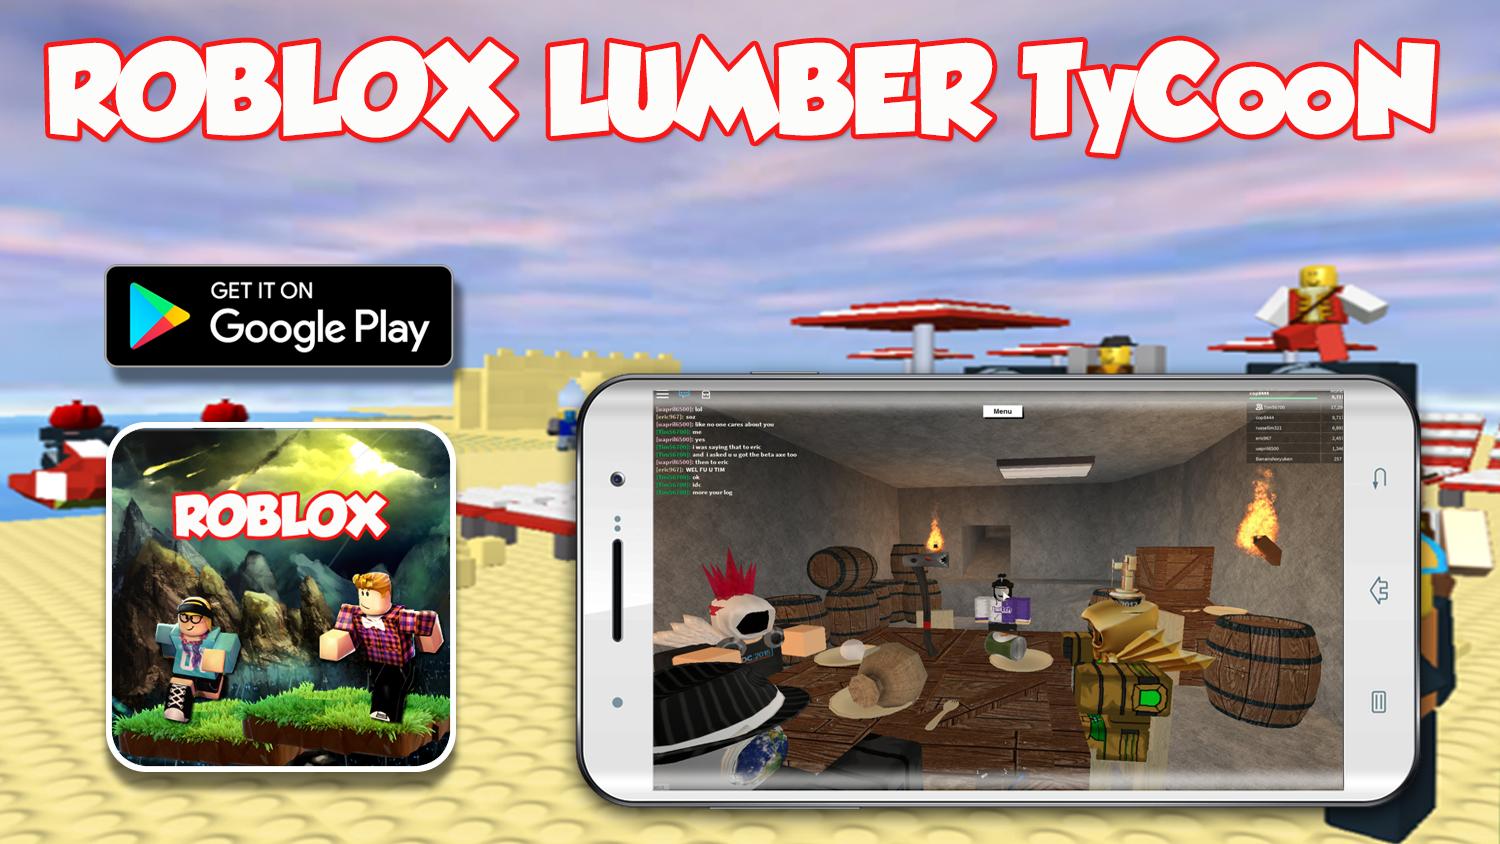 Guide For Roblox 2 Free For Android Apk Download - roblox studio beta apk